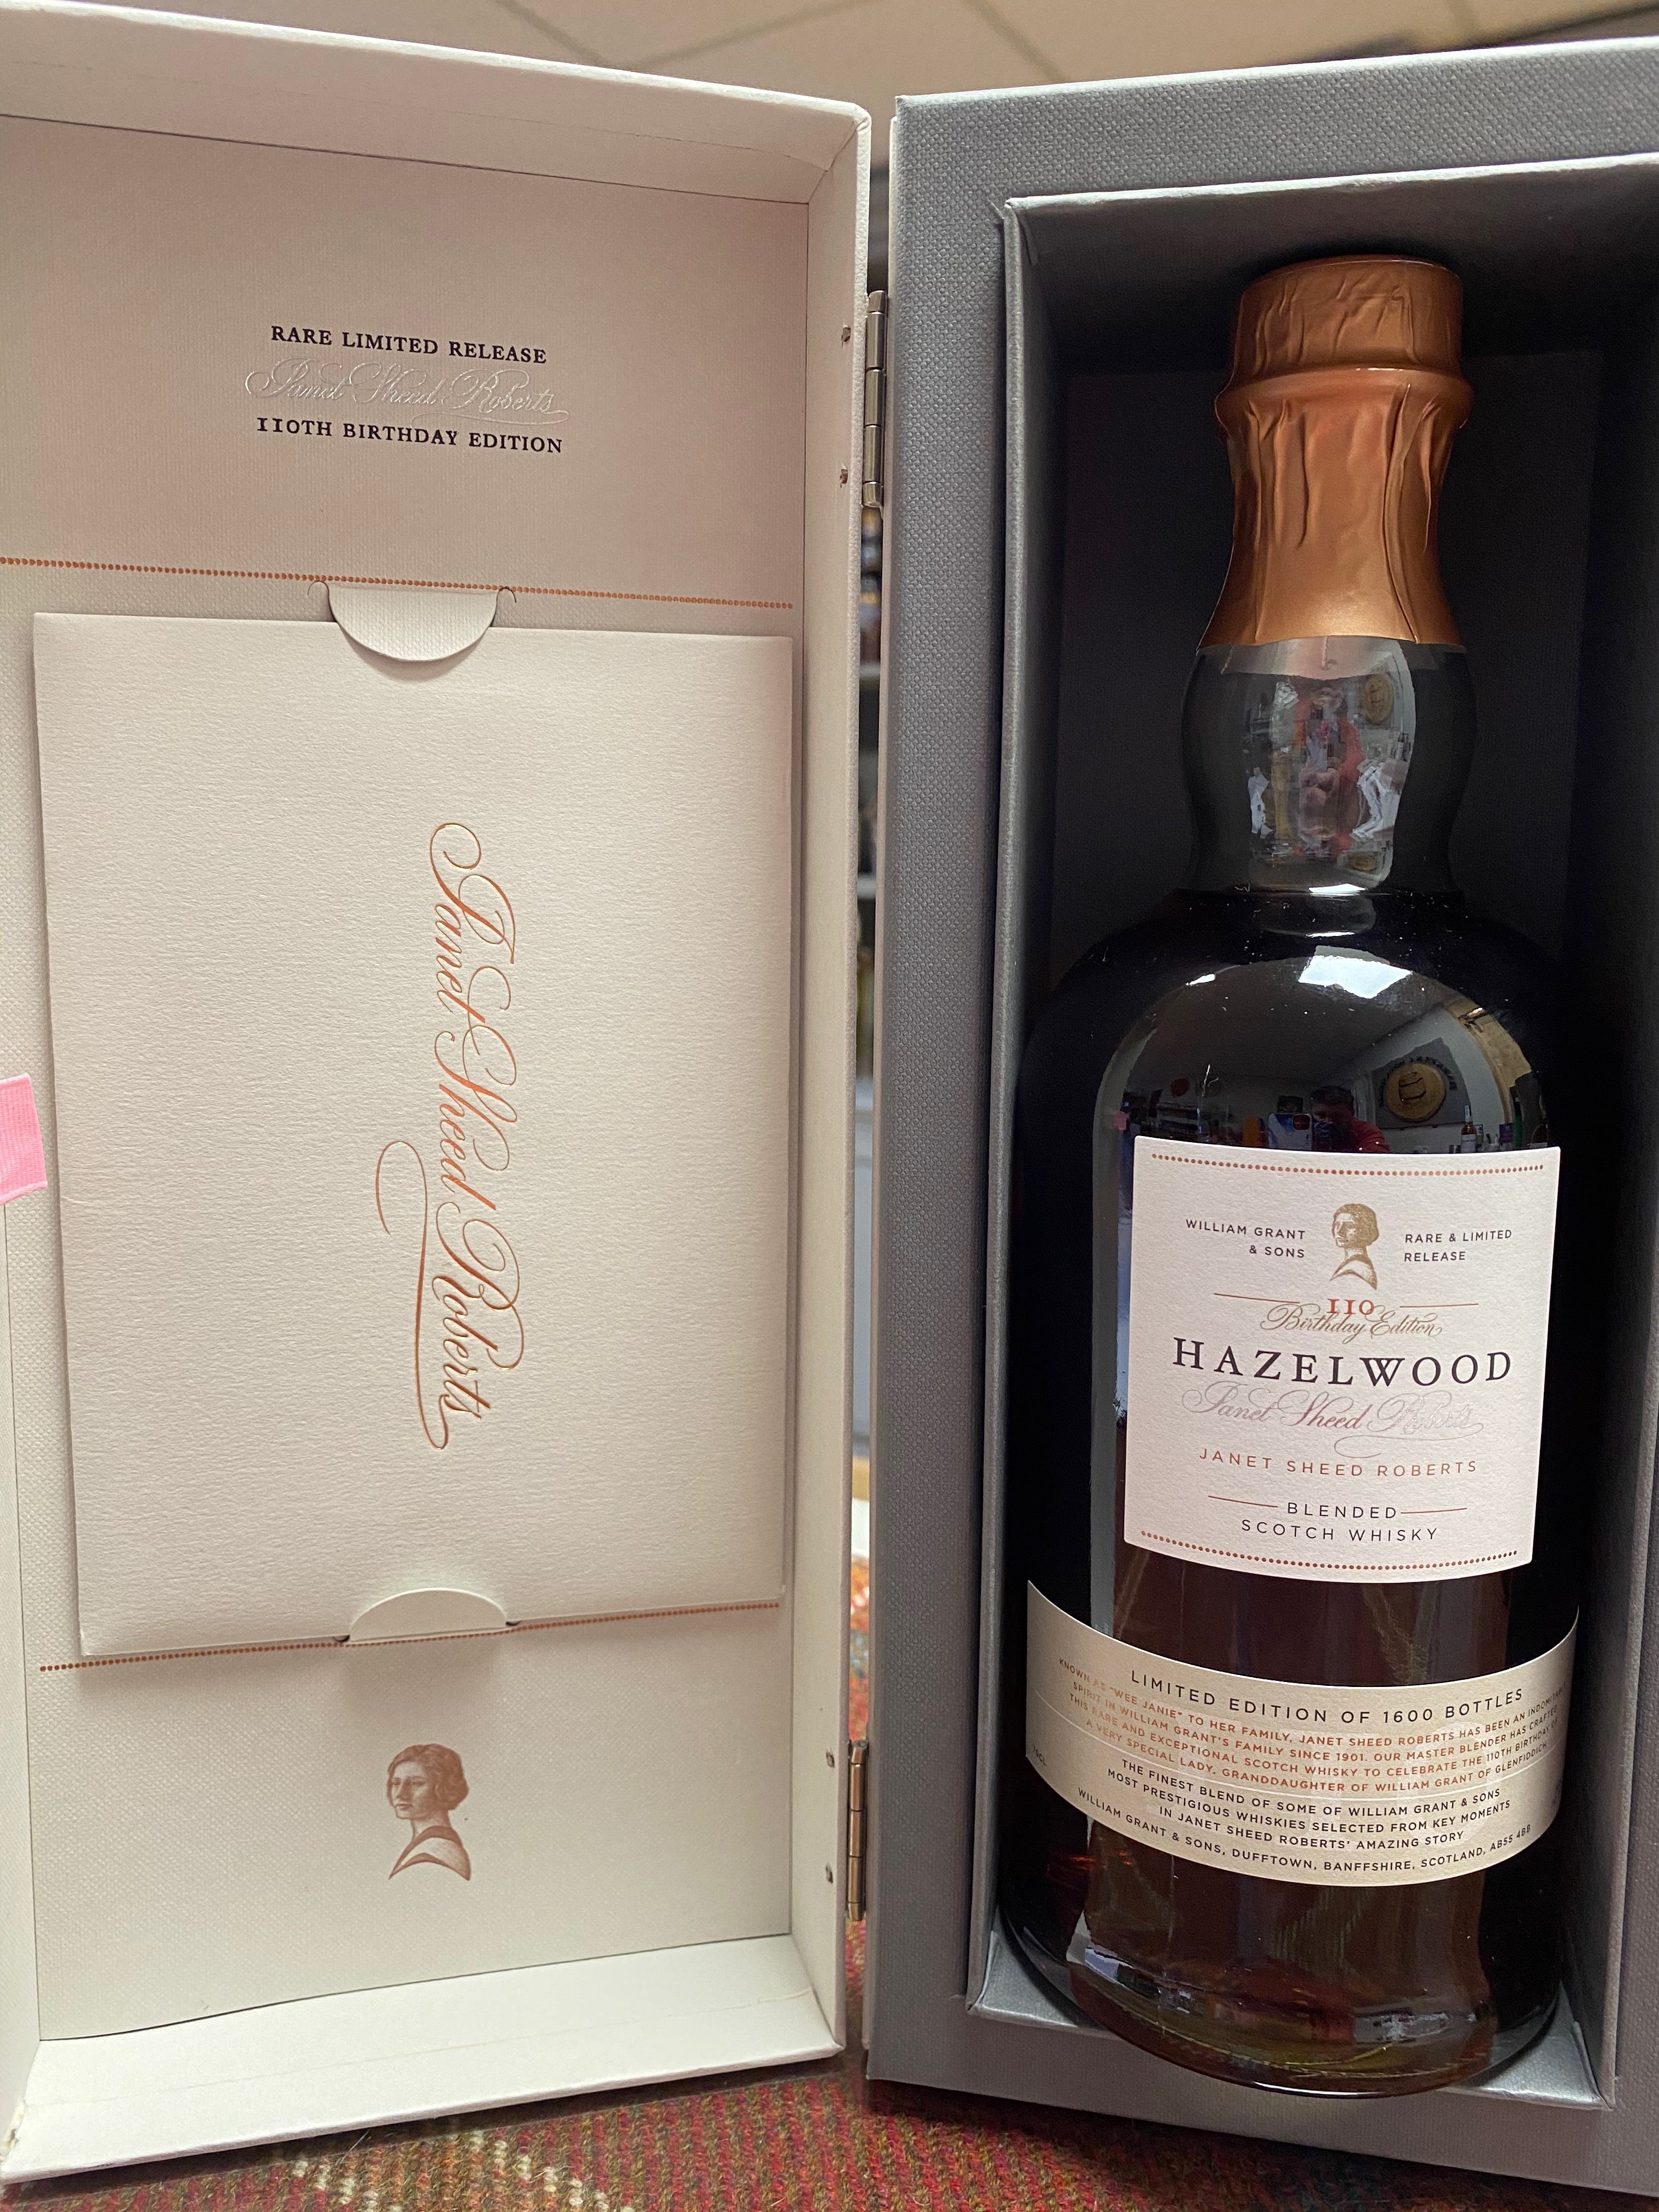 hazelwood janet sheed roberts - 110th birthday edition (70cl, 55%)